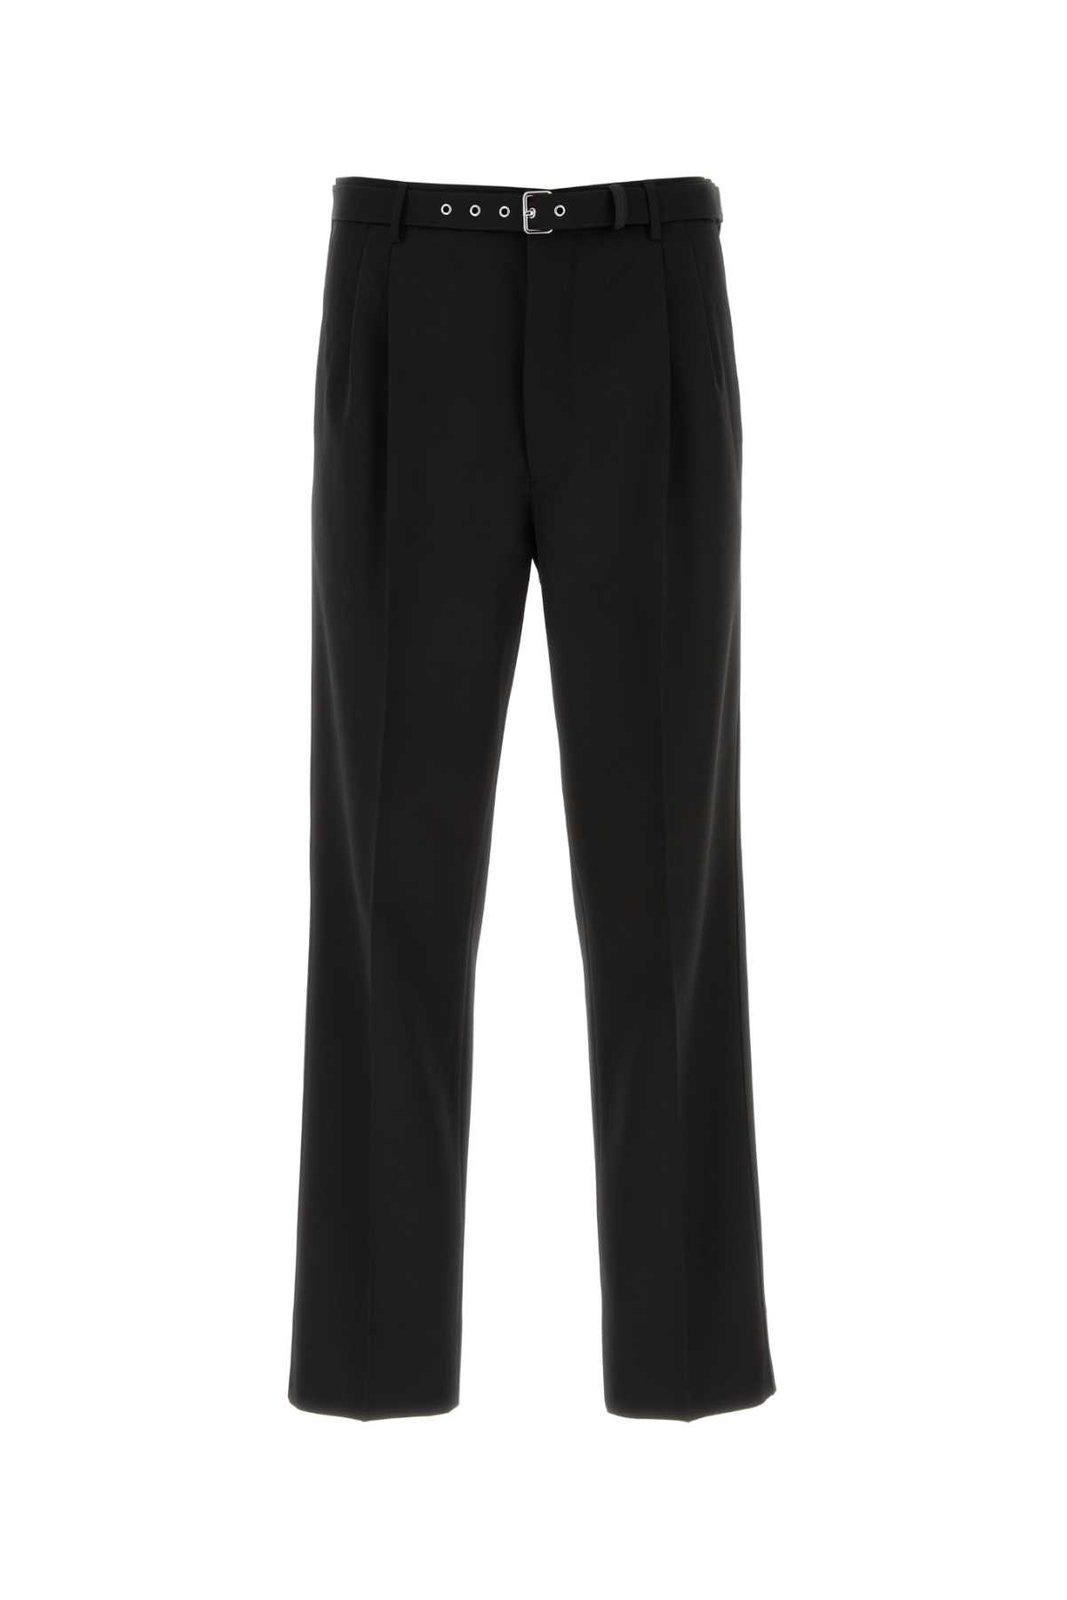 PRADA MID-RISE BELTED STRAIGHT-LEG TROUSERS